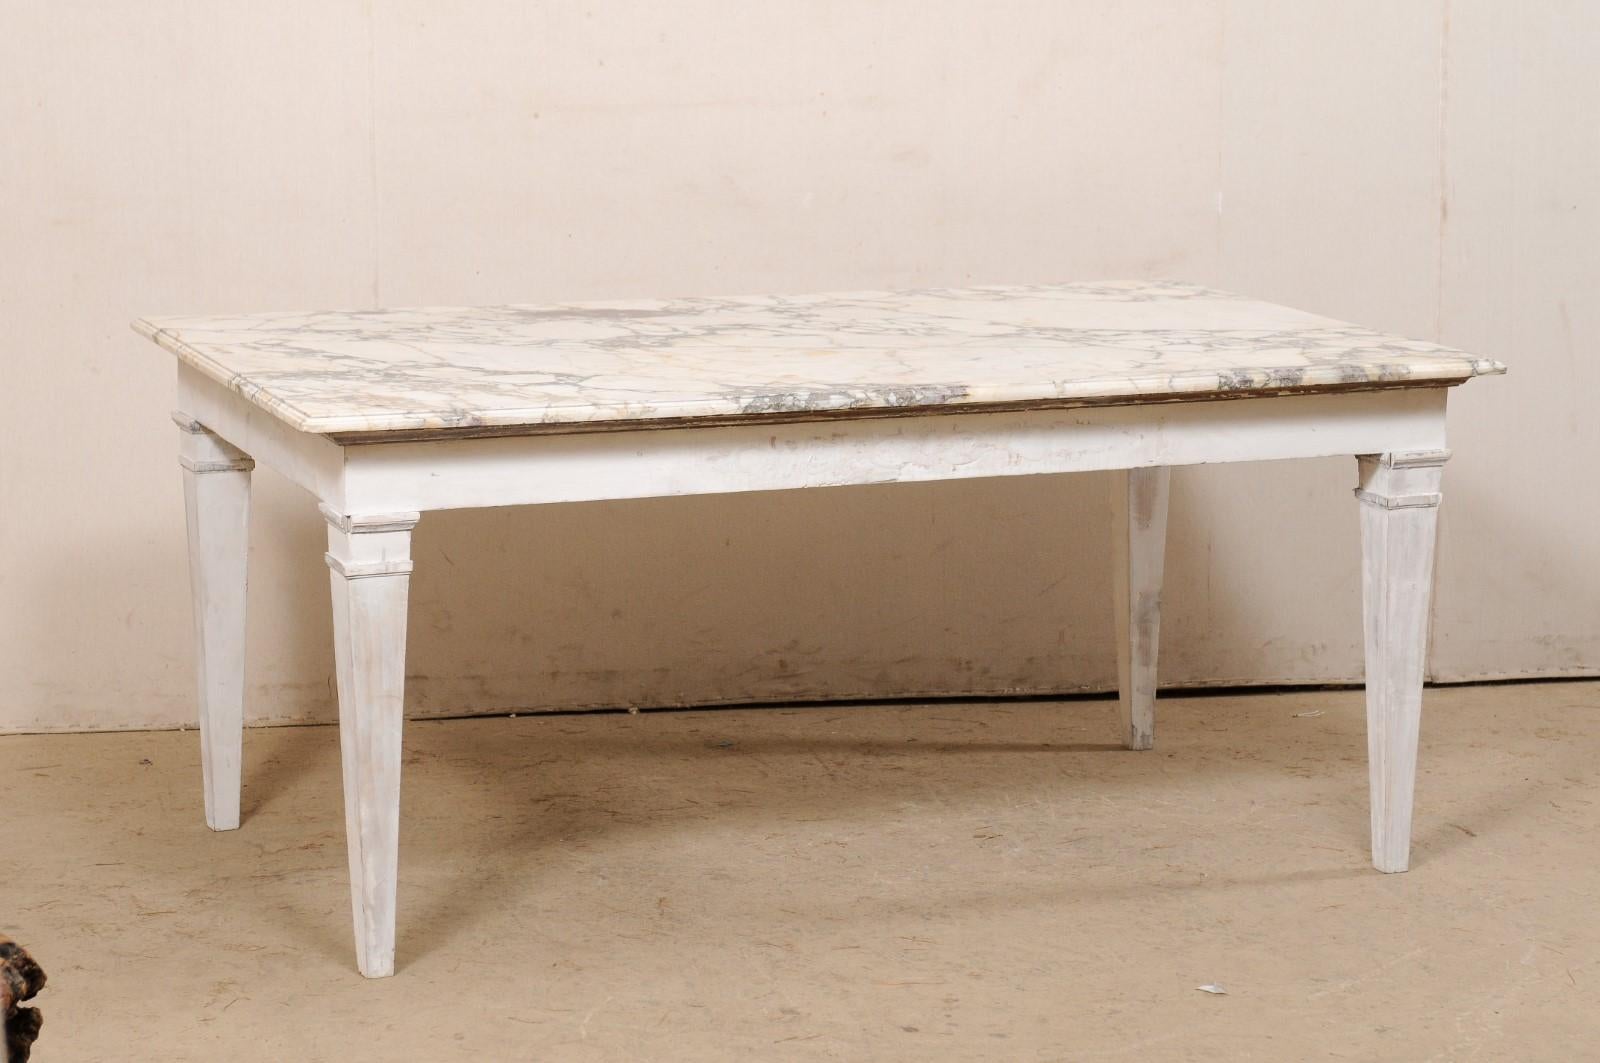 An Italian painted wood table with original marble top. This vintage table from Italy is topped with its original rectangular-shaped marble top, which gives this piece a length of just over 5.5 feet, and has a nice creamy white color with gray,